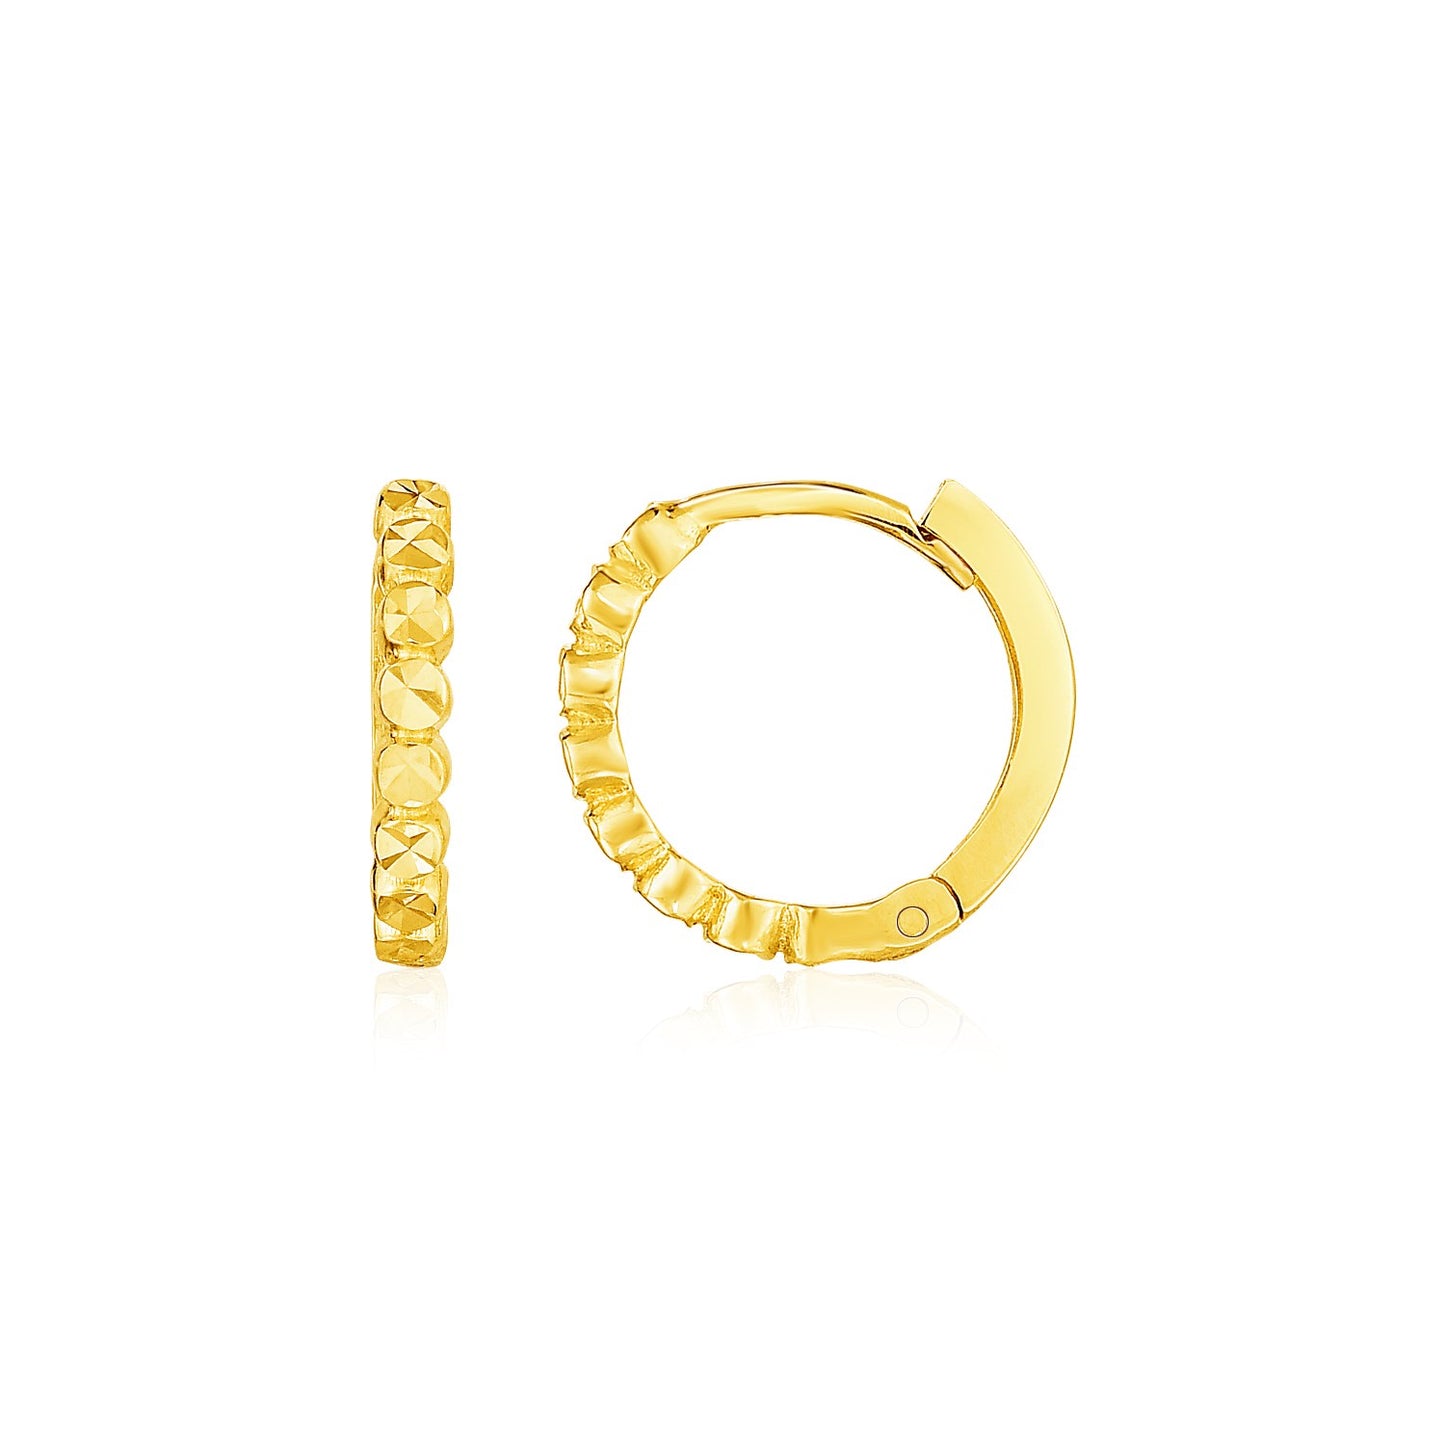 Textured Round Hoops in 14k Yellow Gold